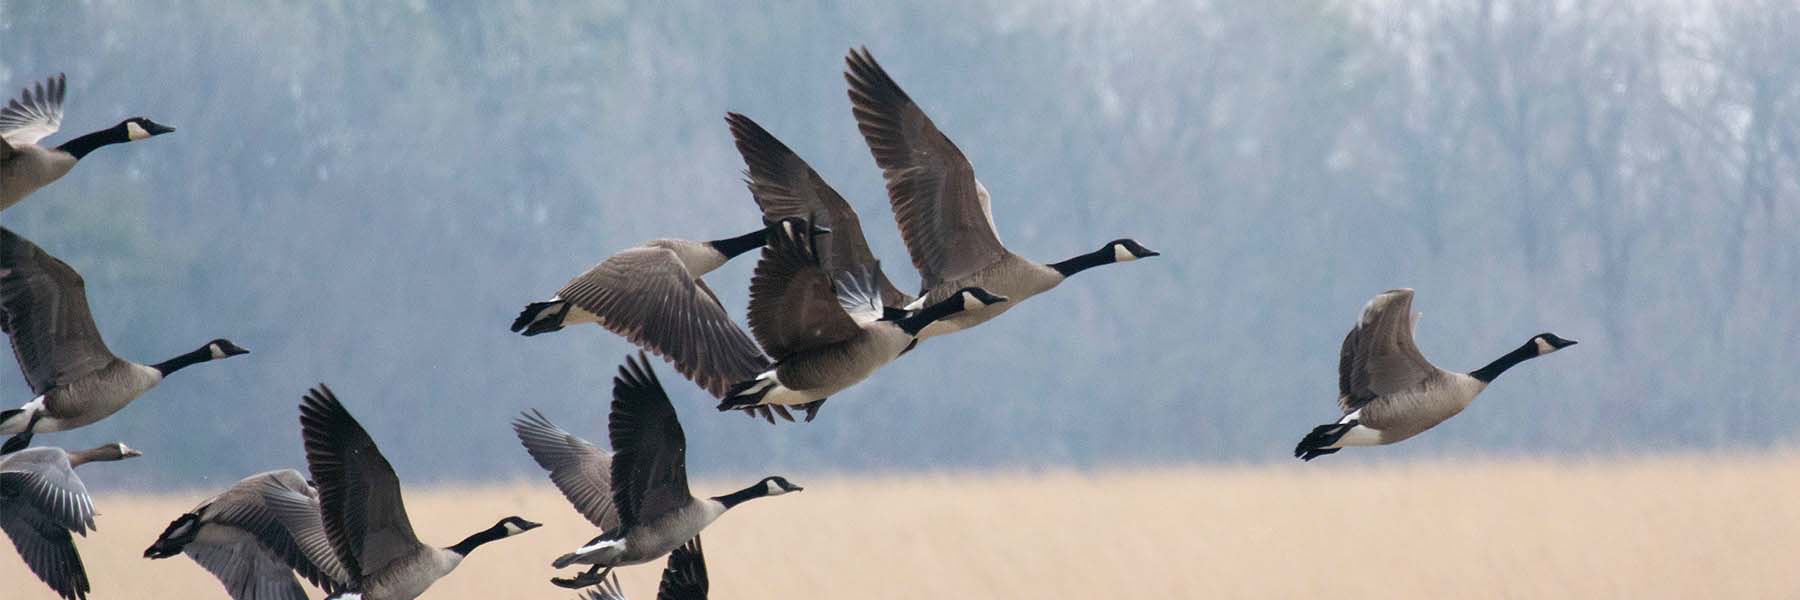 Canada Geese and Greater White-fronted Geese take flight at Goose Pond FWA in Greene County, Indiana.